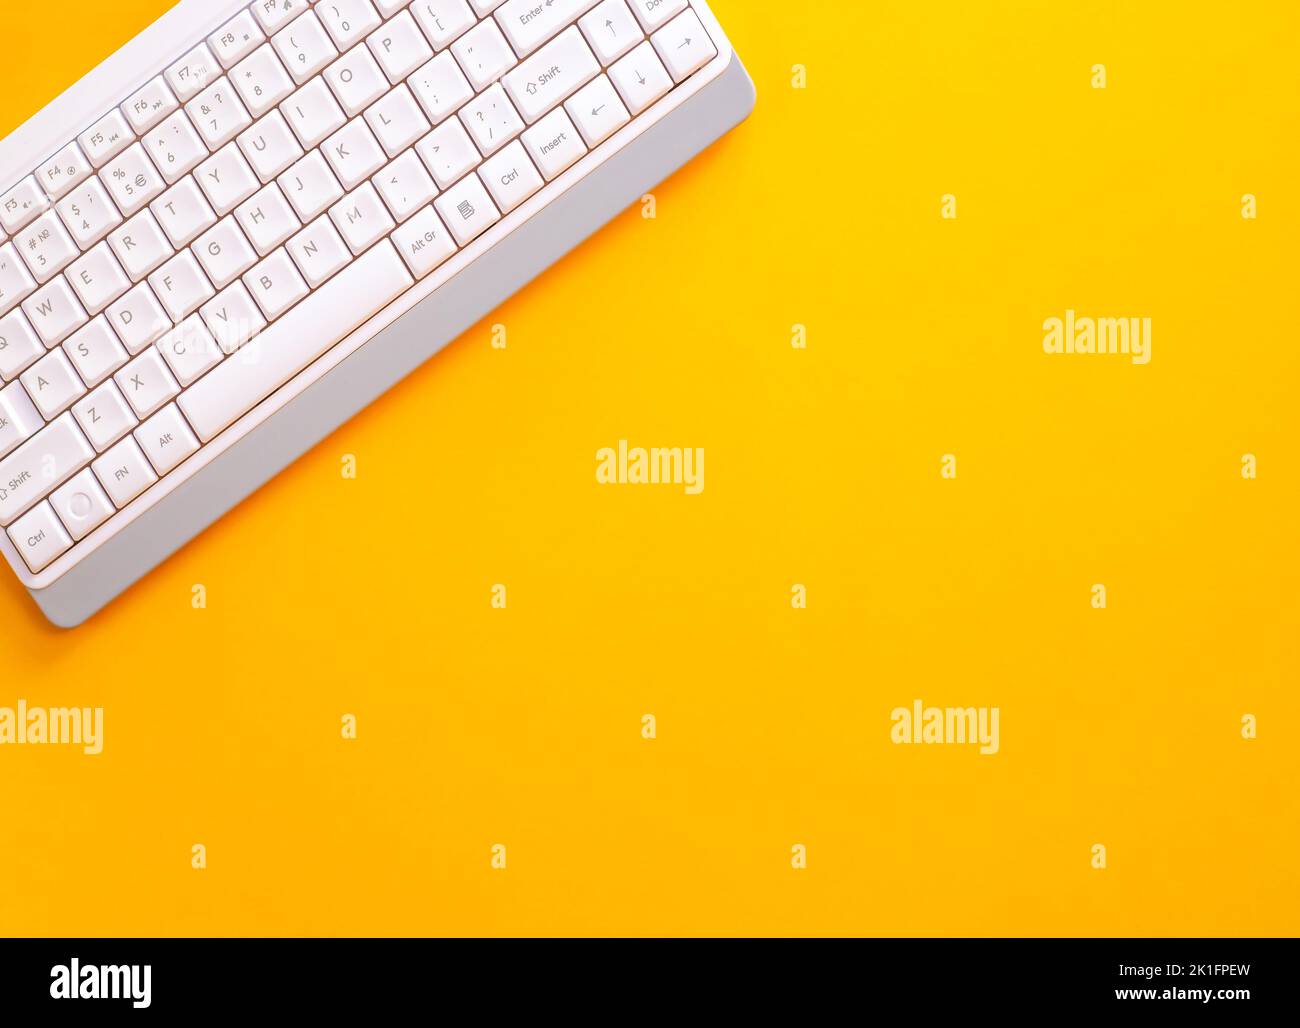 Modern white keyboard on yellow background, great design for any purpose. Flat PC symbol. Top view, copy space Stock Photo